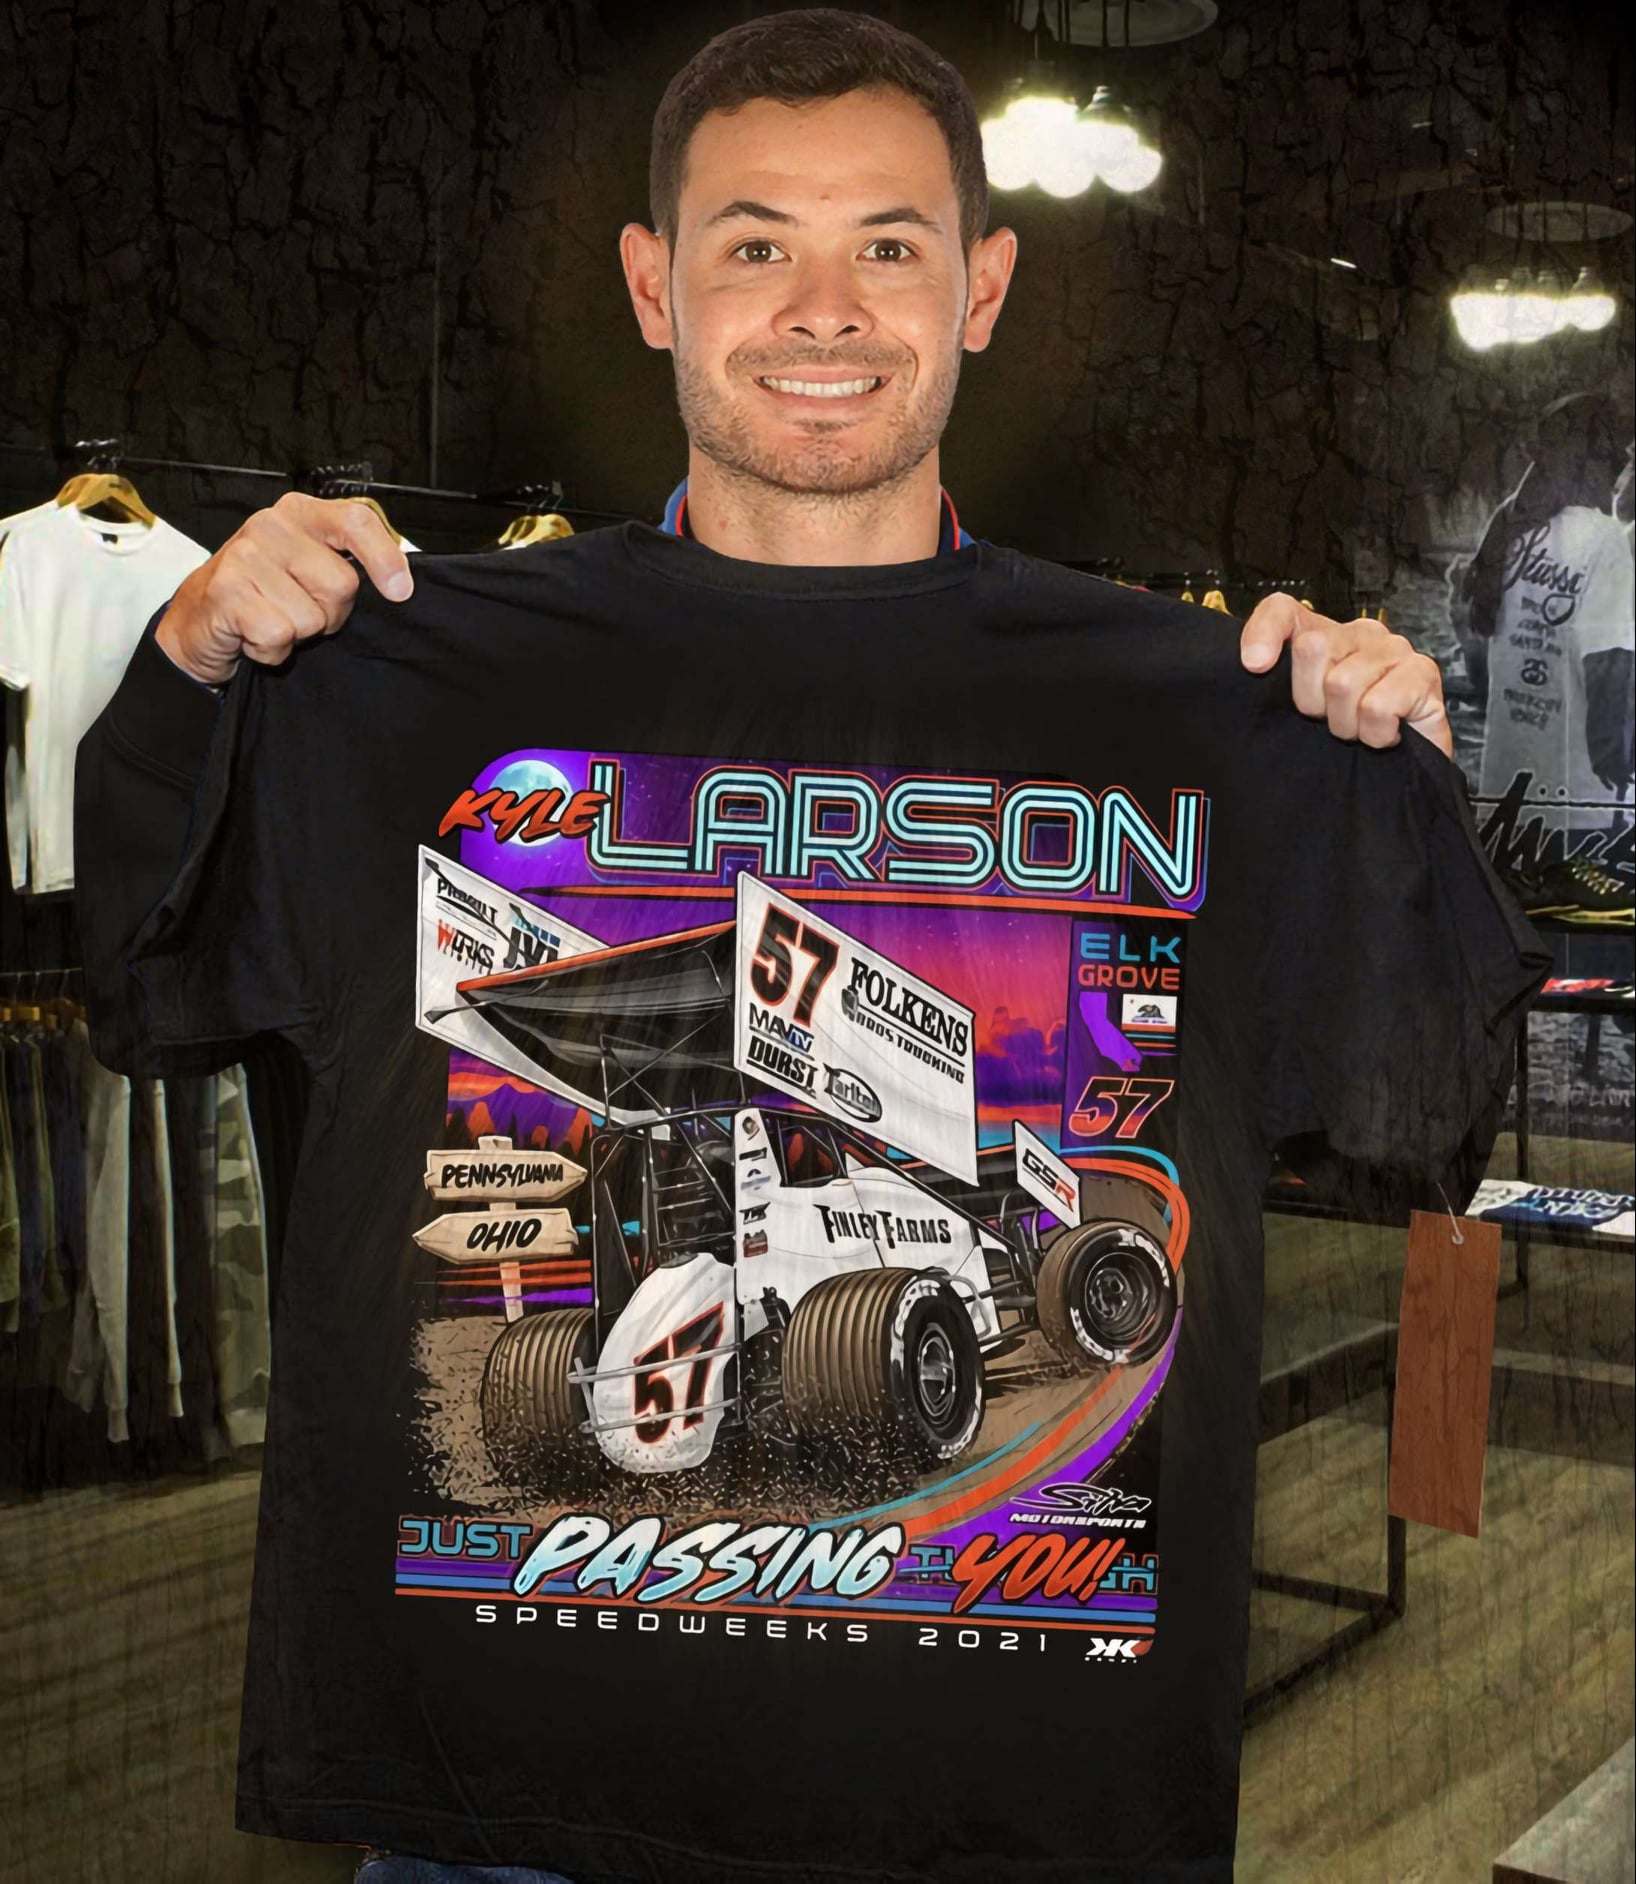 Kyle Larson - Formula one racer, Just passing you